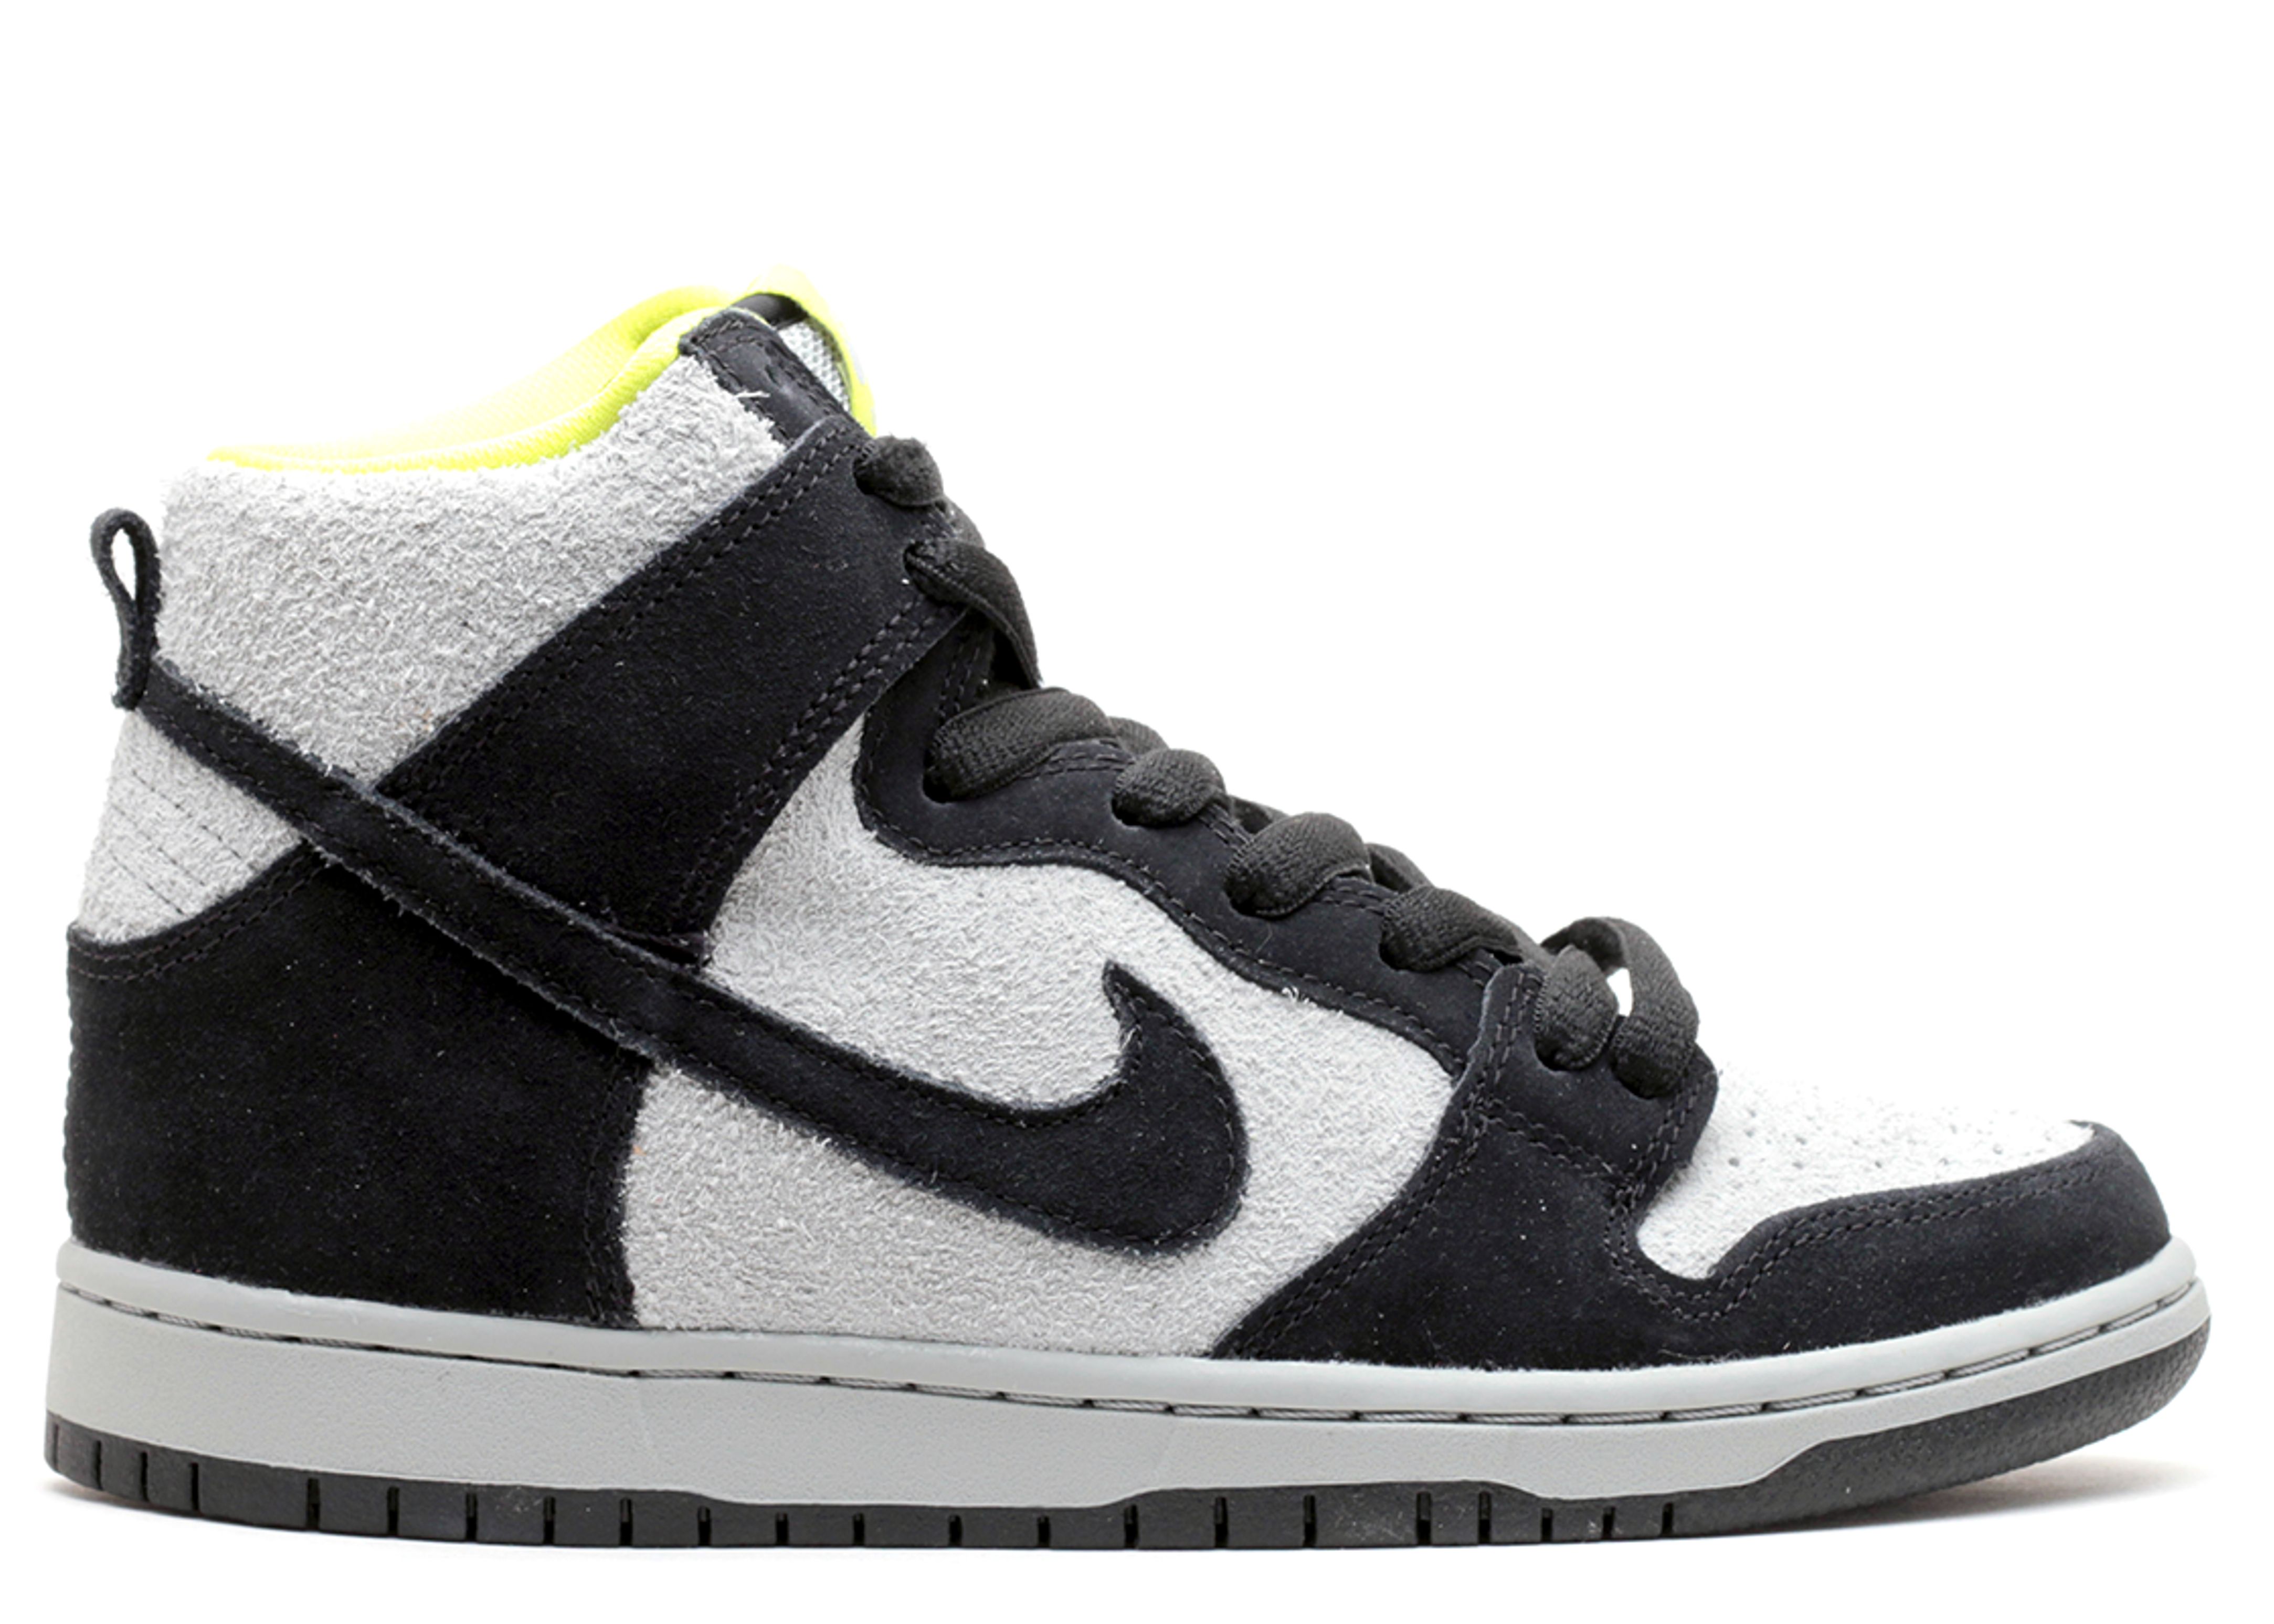 black and grey dunks